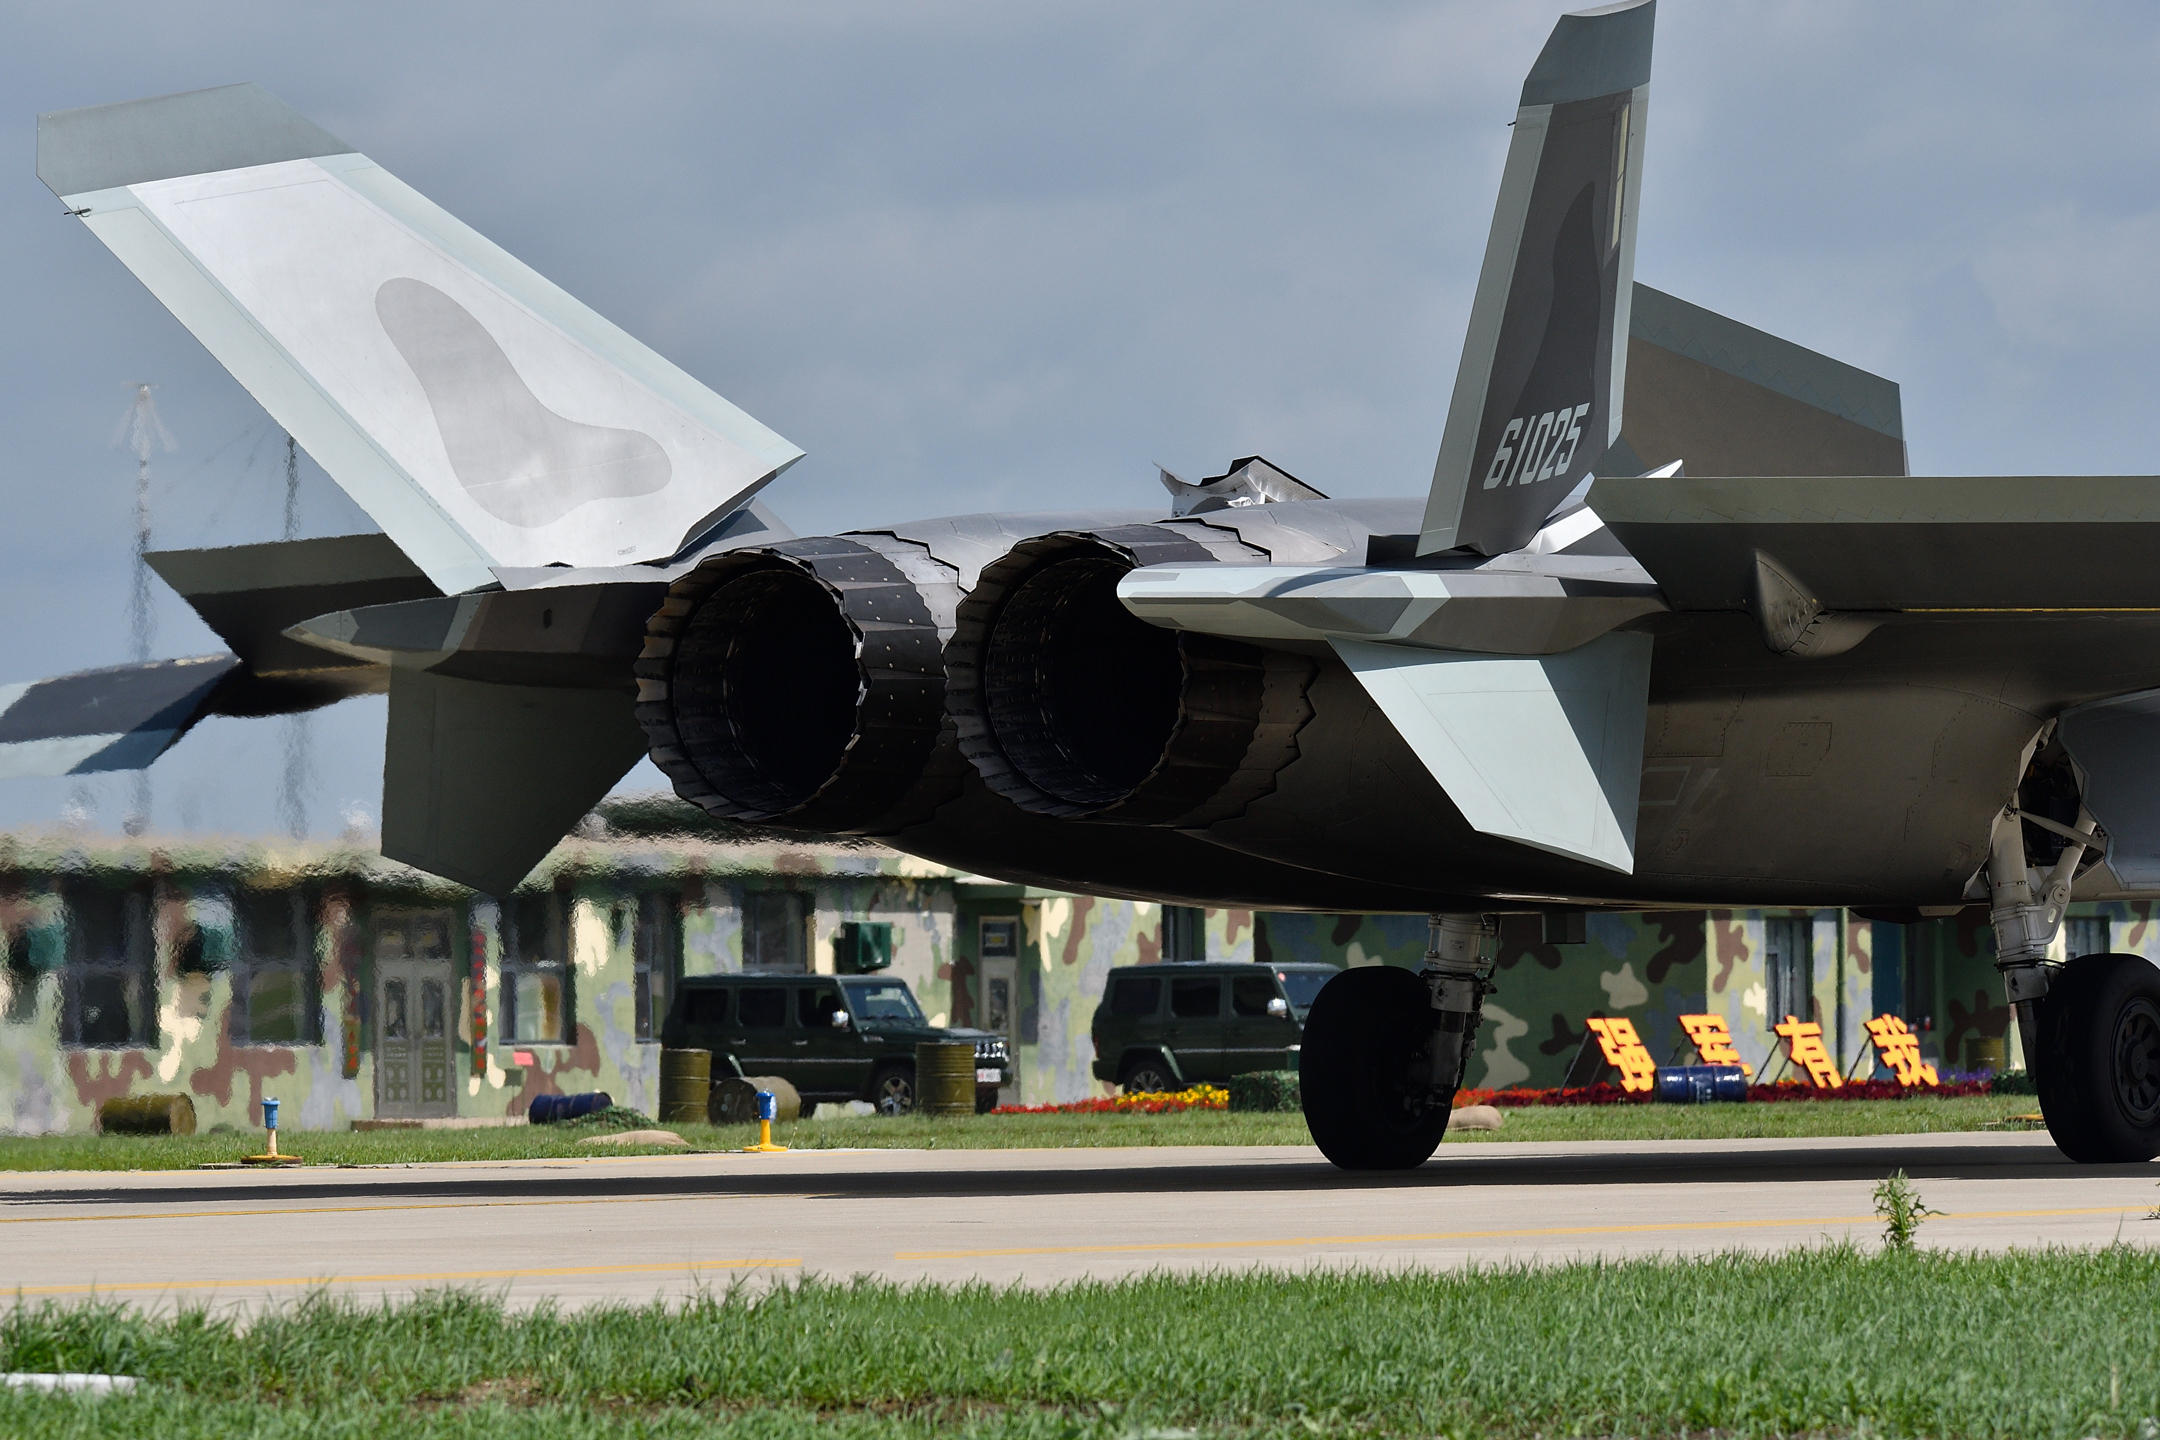 General 2160x1440 PLAAF Chengdu J-20 military military aircraft military vehicle clouds grass rear view Chinese aircraft